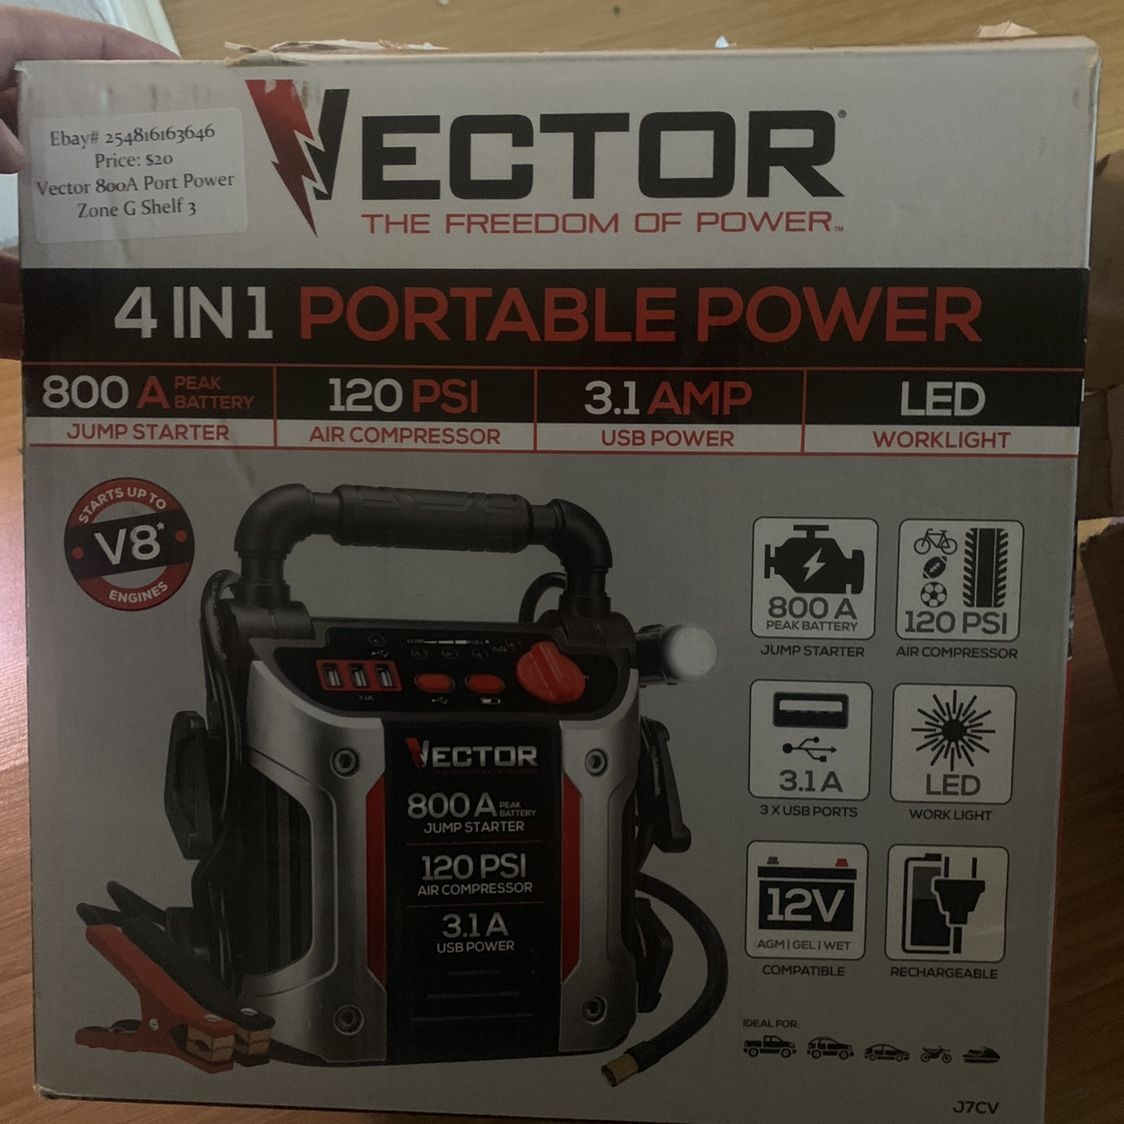 NEW Vector Power Station/air compressor (retail $85+)